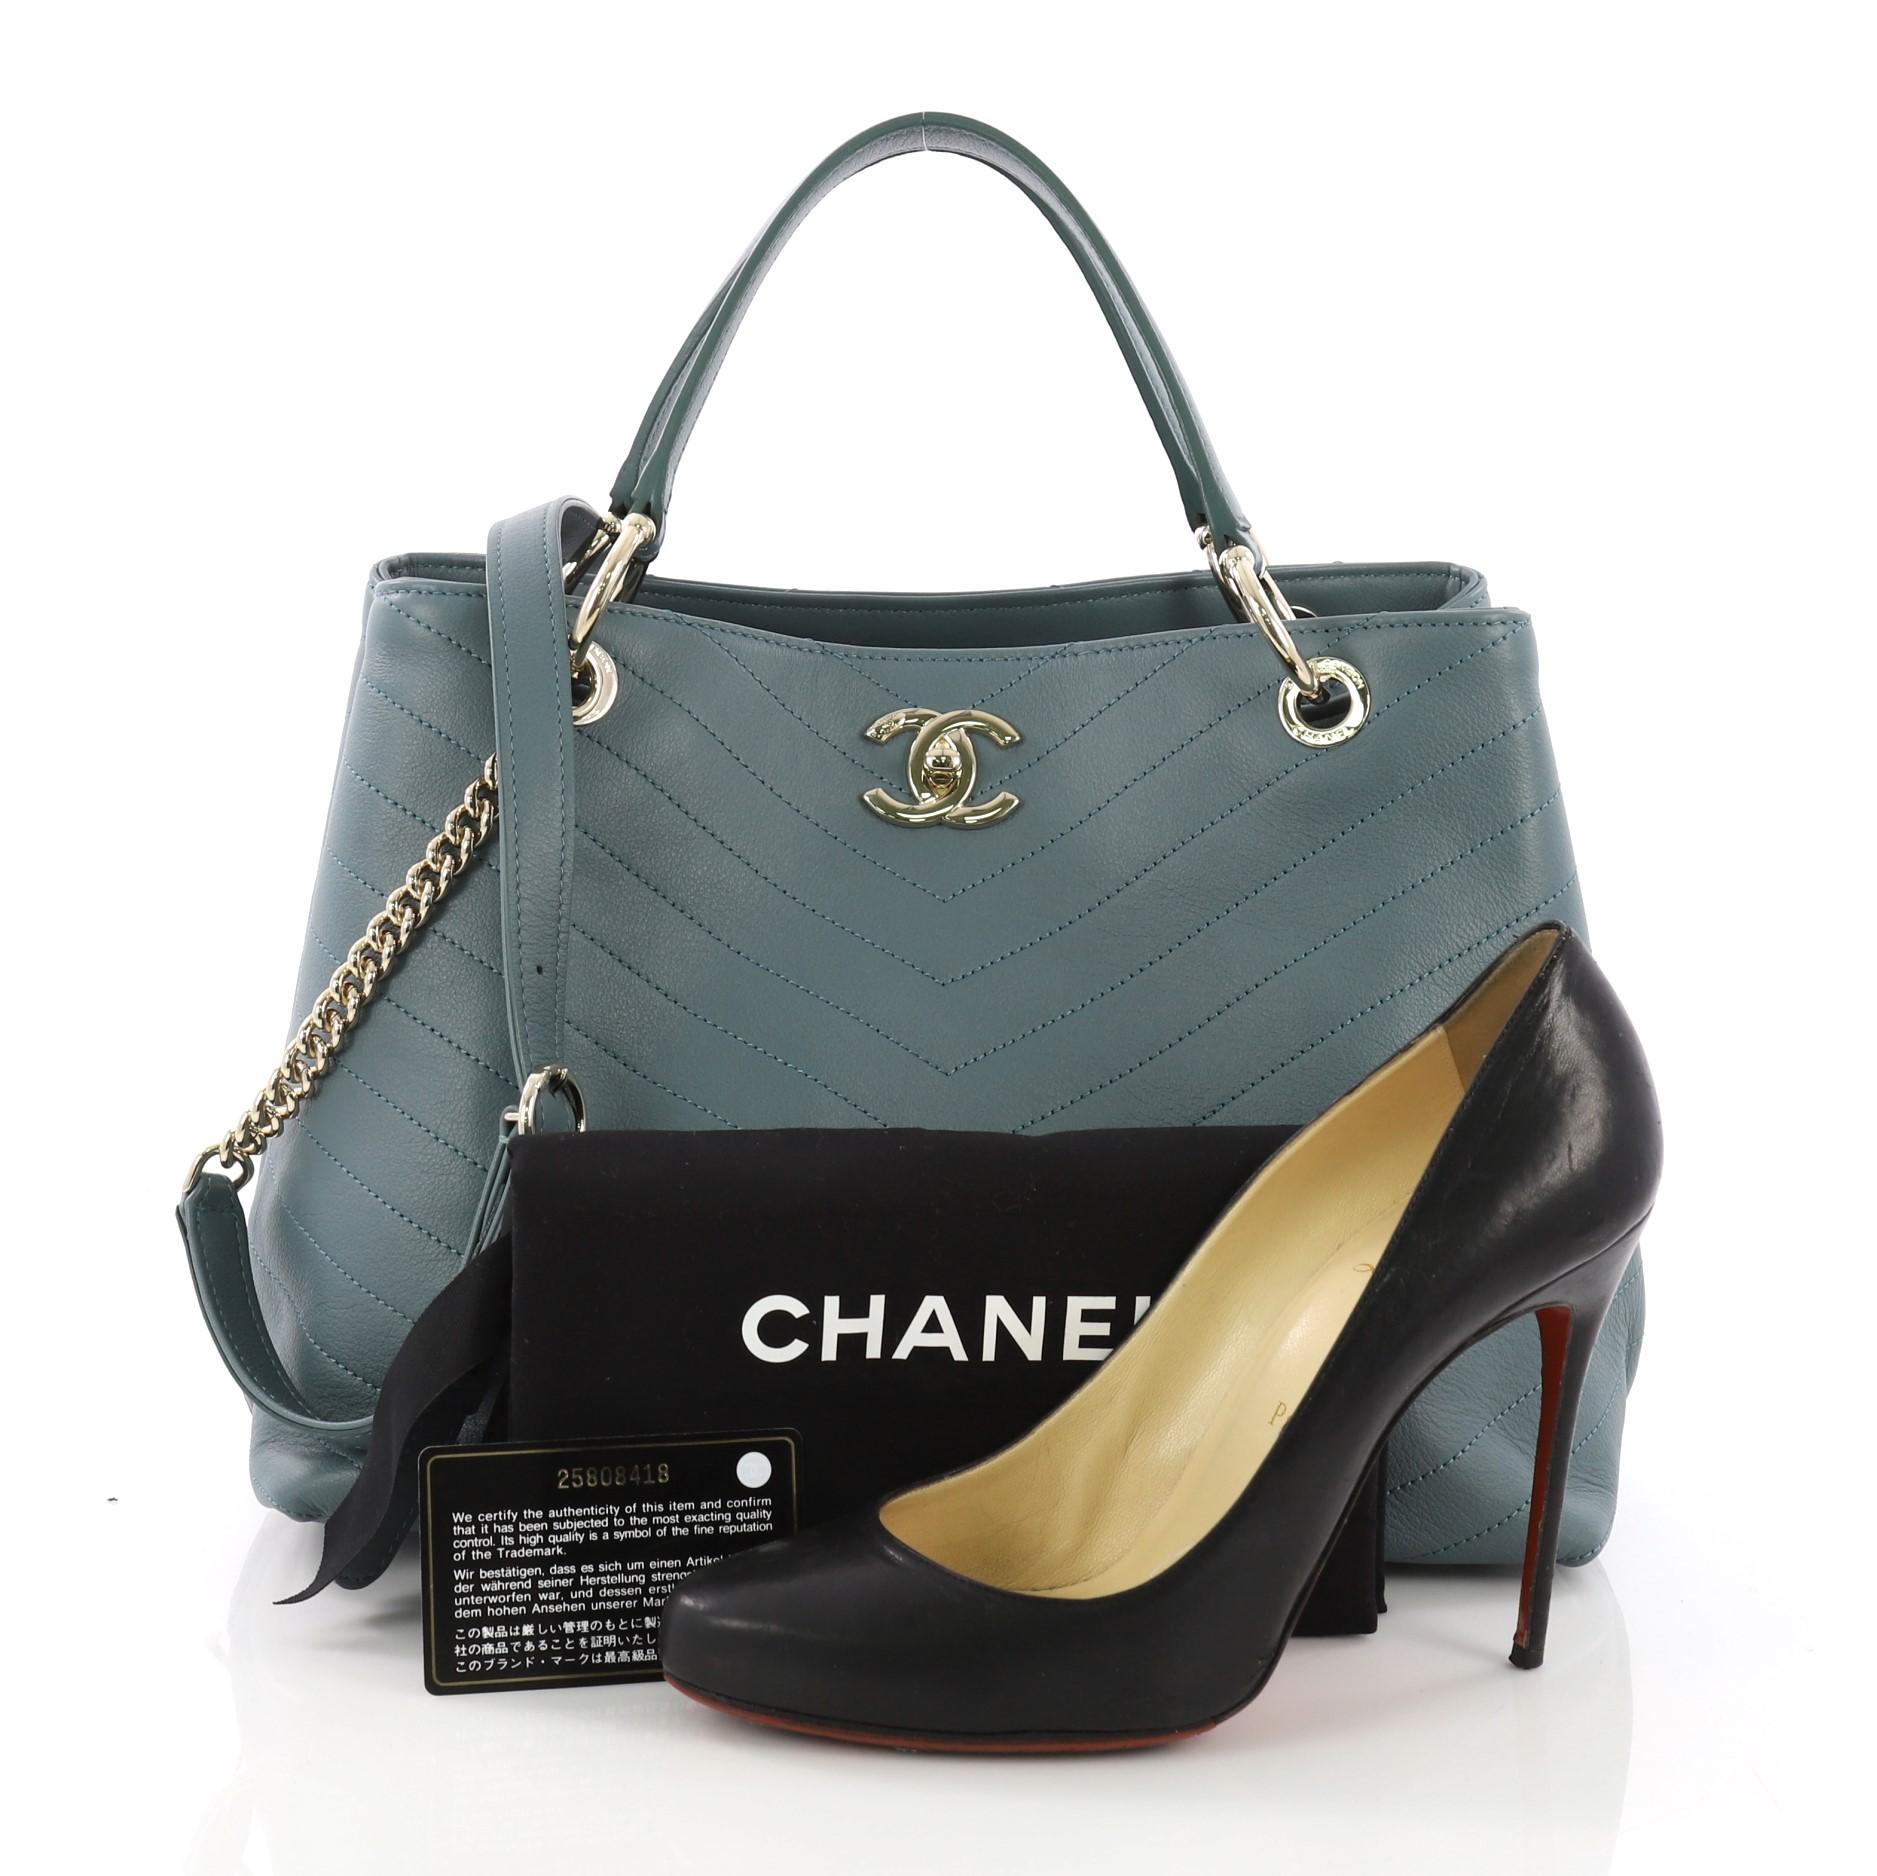 This Chanel Chevron Chic Shopping Tote Chevron Calfskin Small, crafted from teal chevron calfskin leather, features dual top handles, woven-in leather straps, protective base studs, and gold-tone hardware. Its CC turn-lock closure opens to a